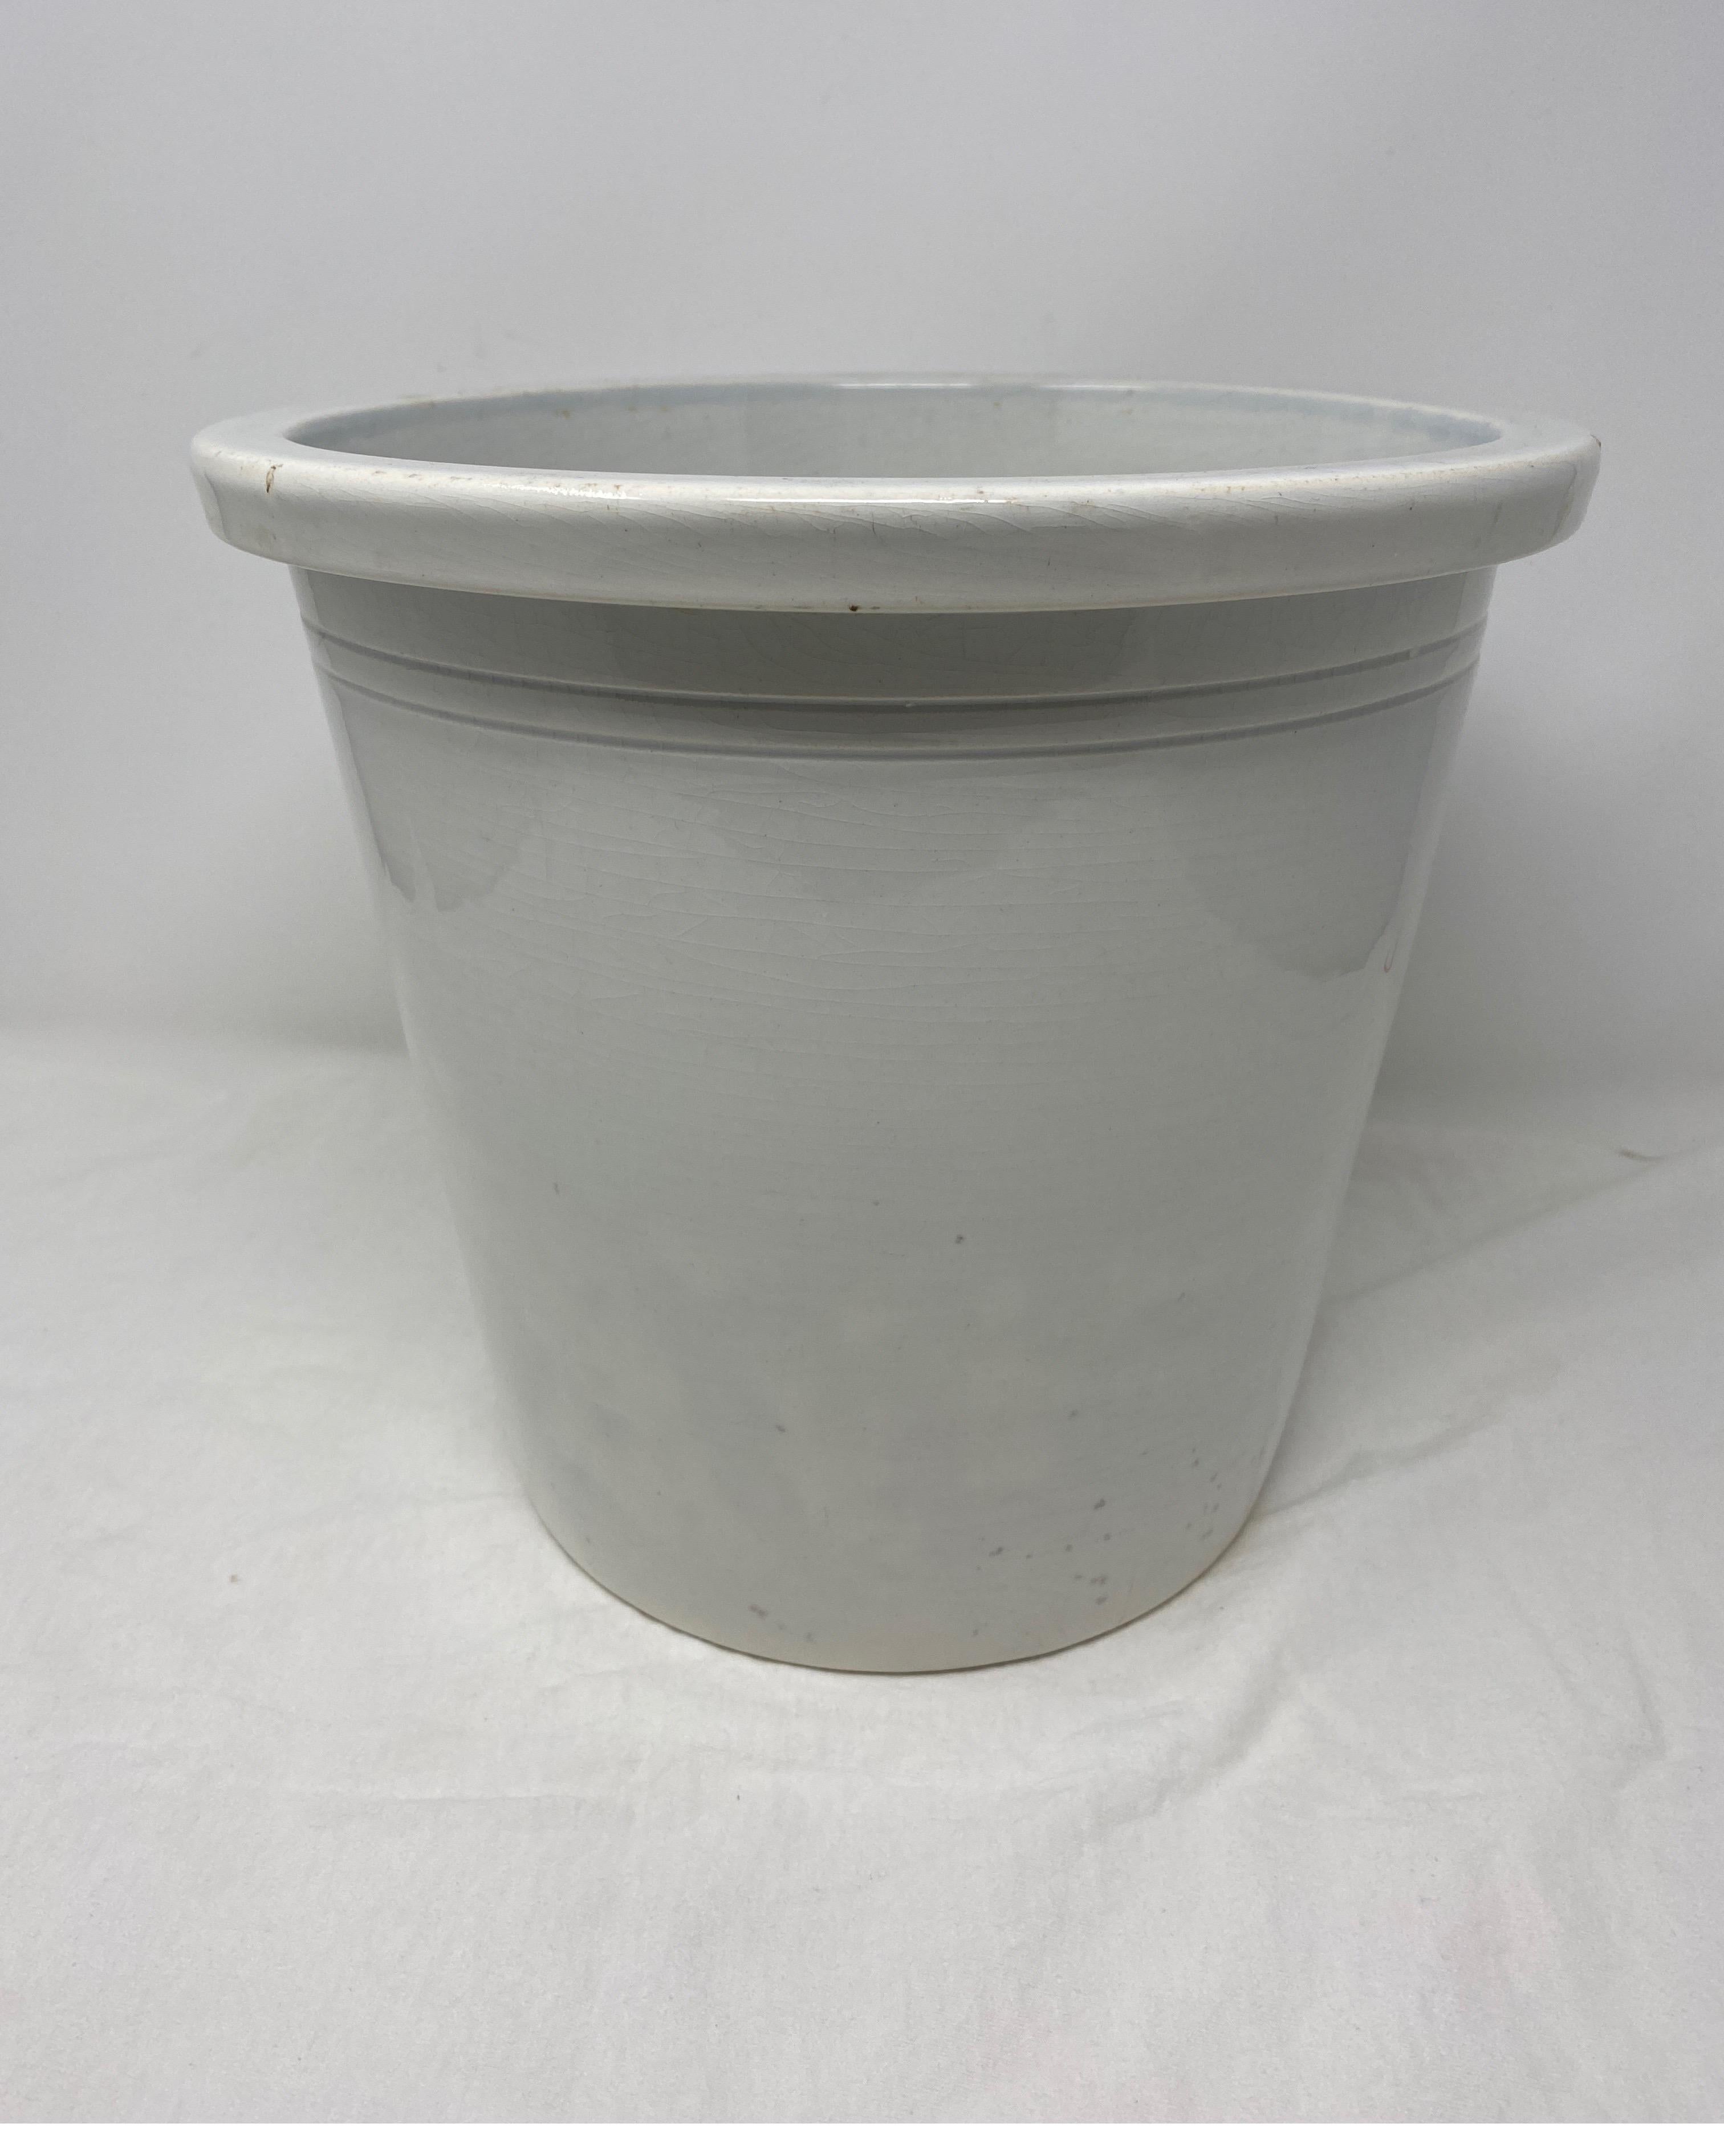 White glazed French pottery, circa 1870. So decorative, with a plant or to store your kitchen utensils.